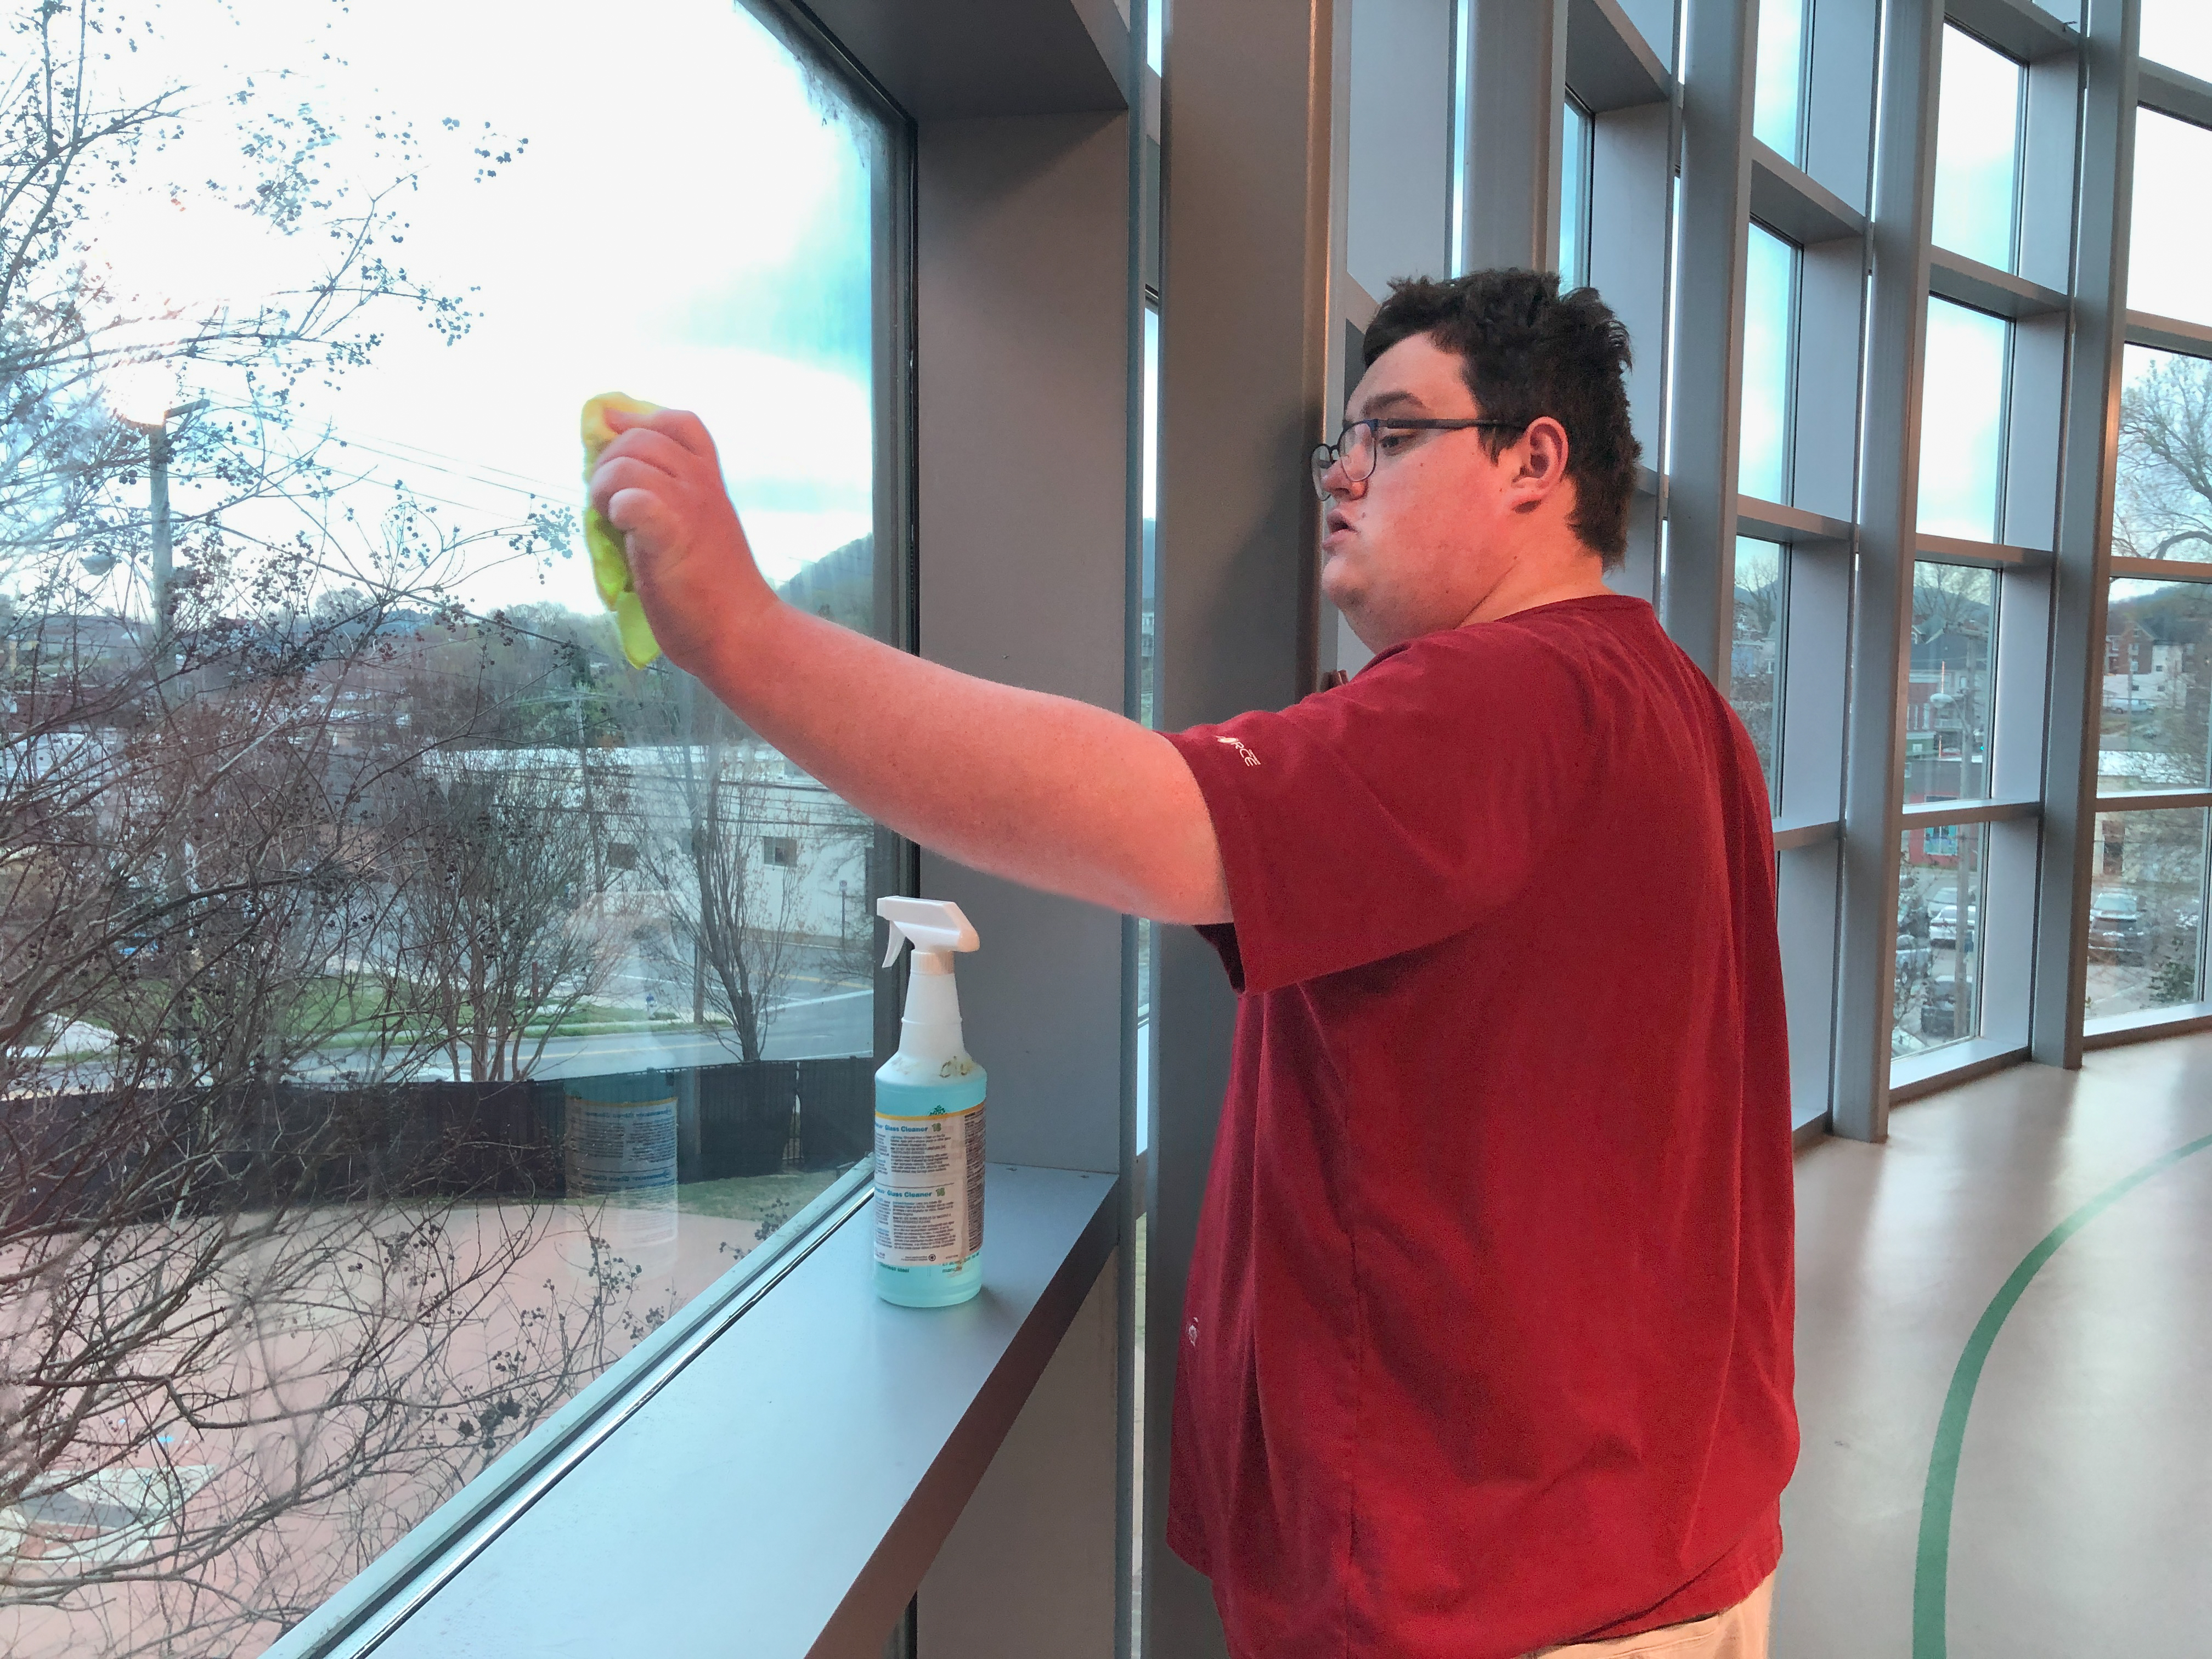 A teenage boy in a red shirt with glasses cleans a window overlooking bare trees